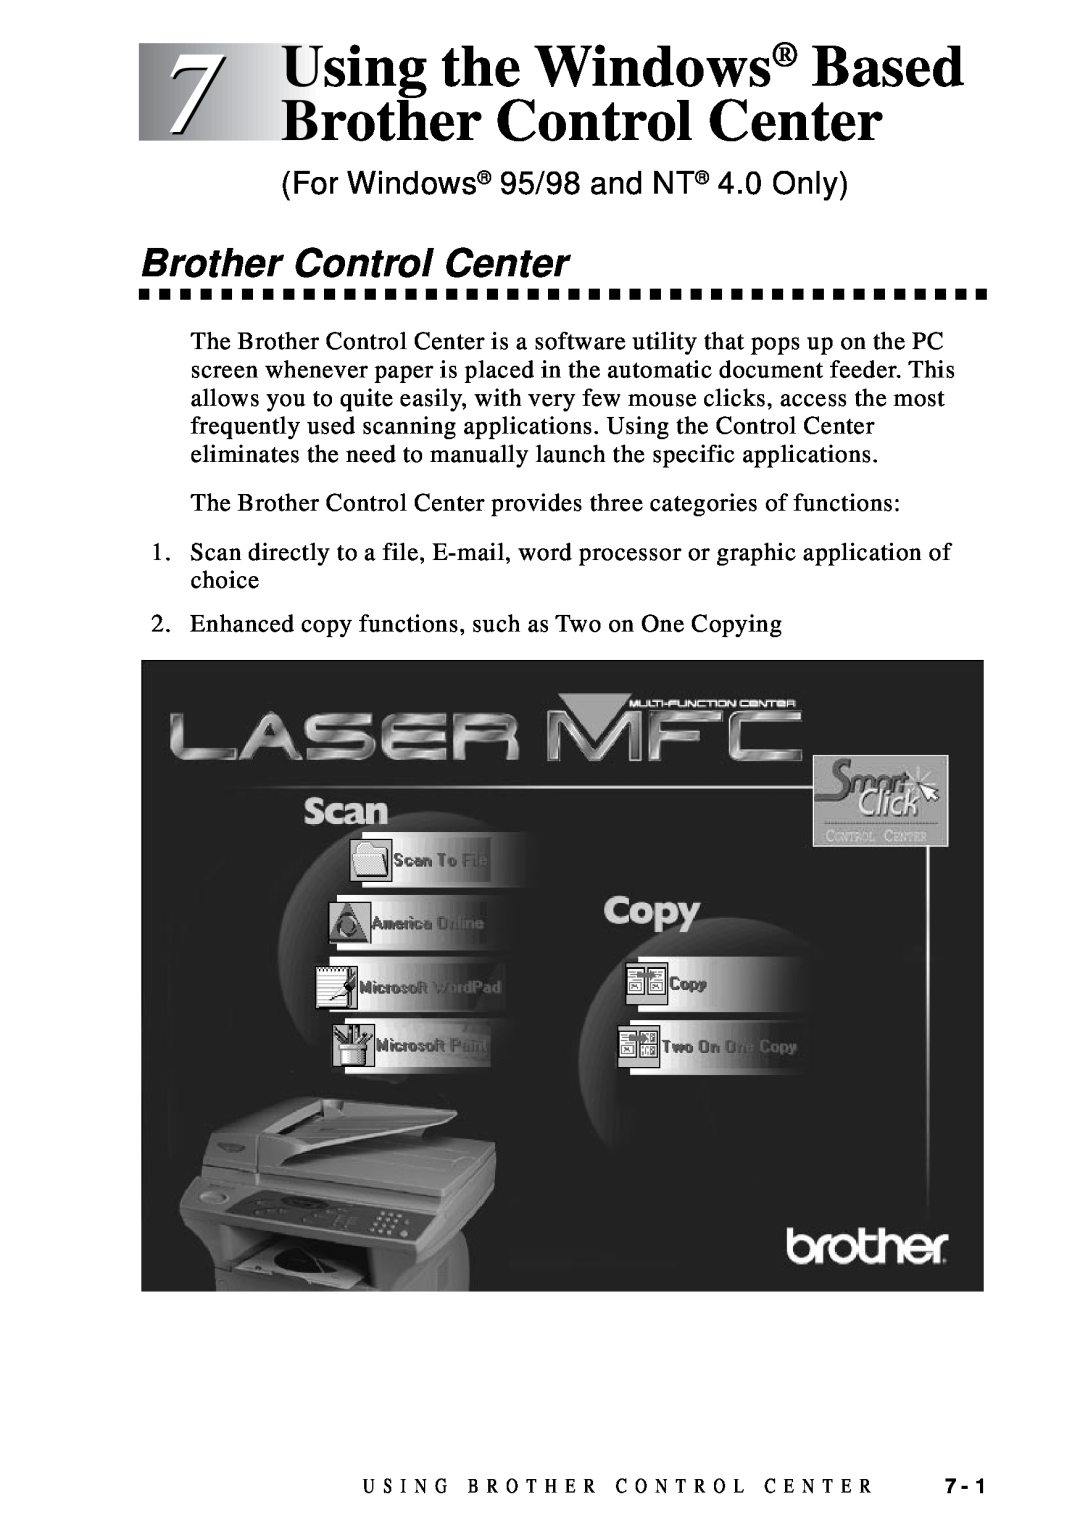 Brother DCP1200 manual Using the Windows Based Brother Control Center, For Windows 95/98 and NT 4.0 Only 